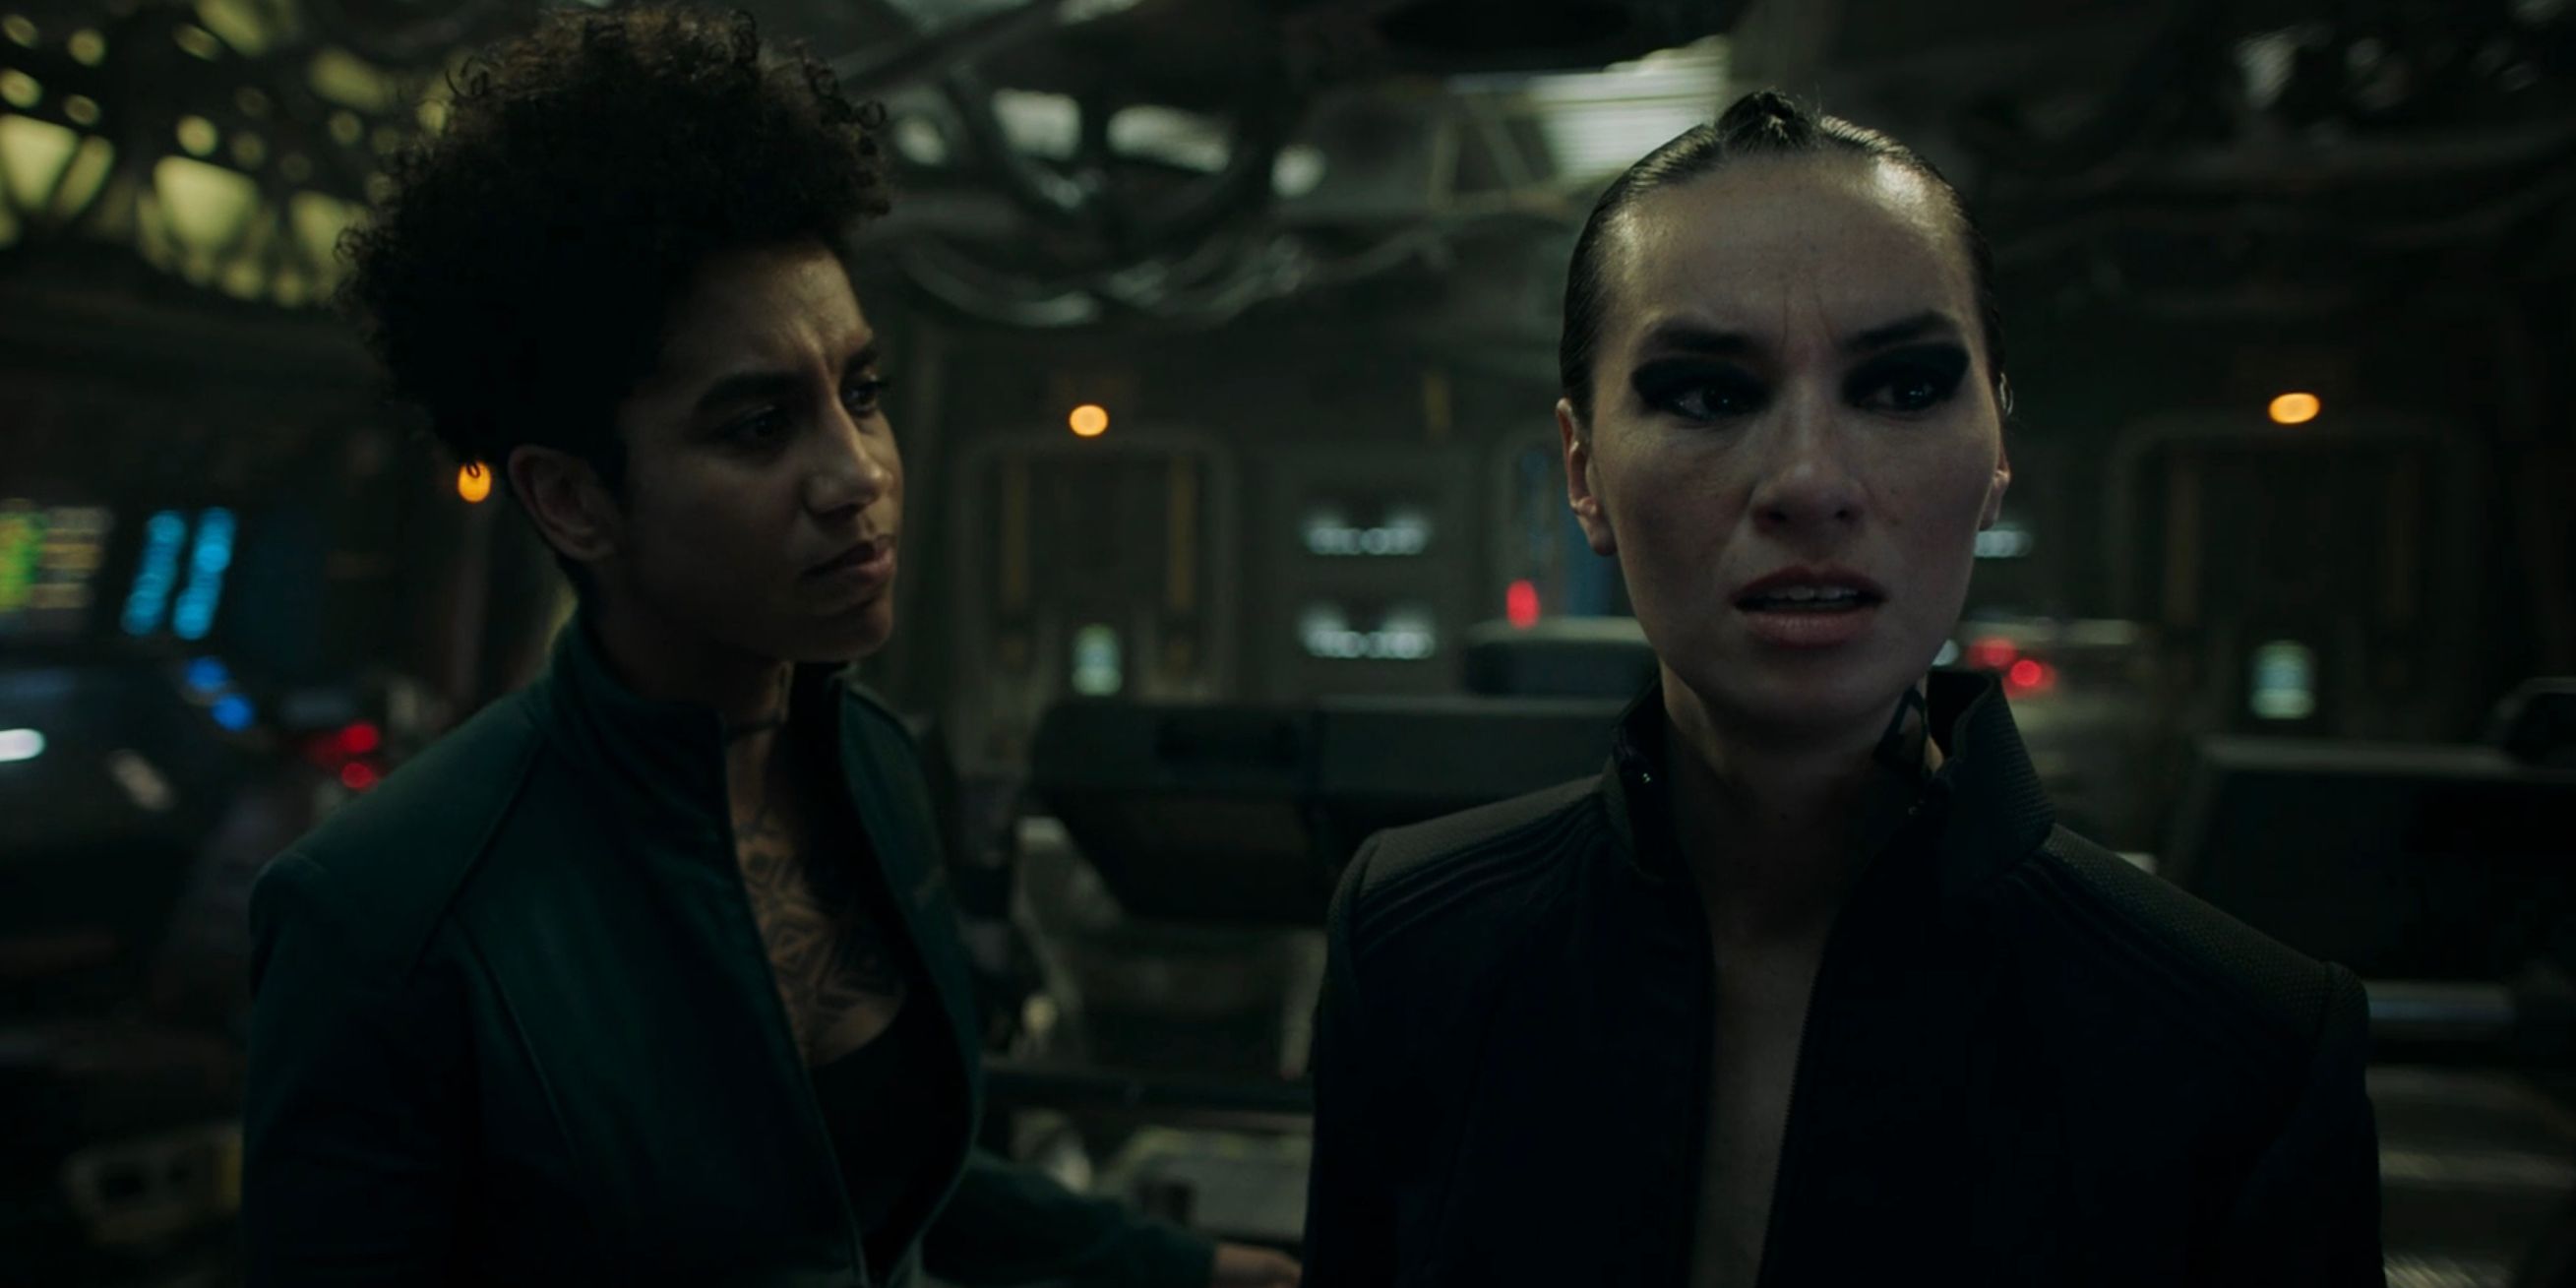 The Expanse: Drummer & Naomi’s Reunion Defines The Entire Series' Theme